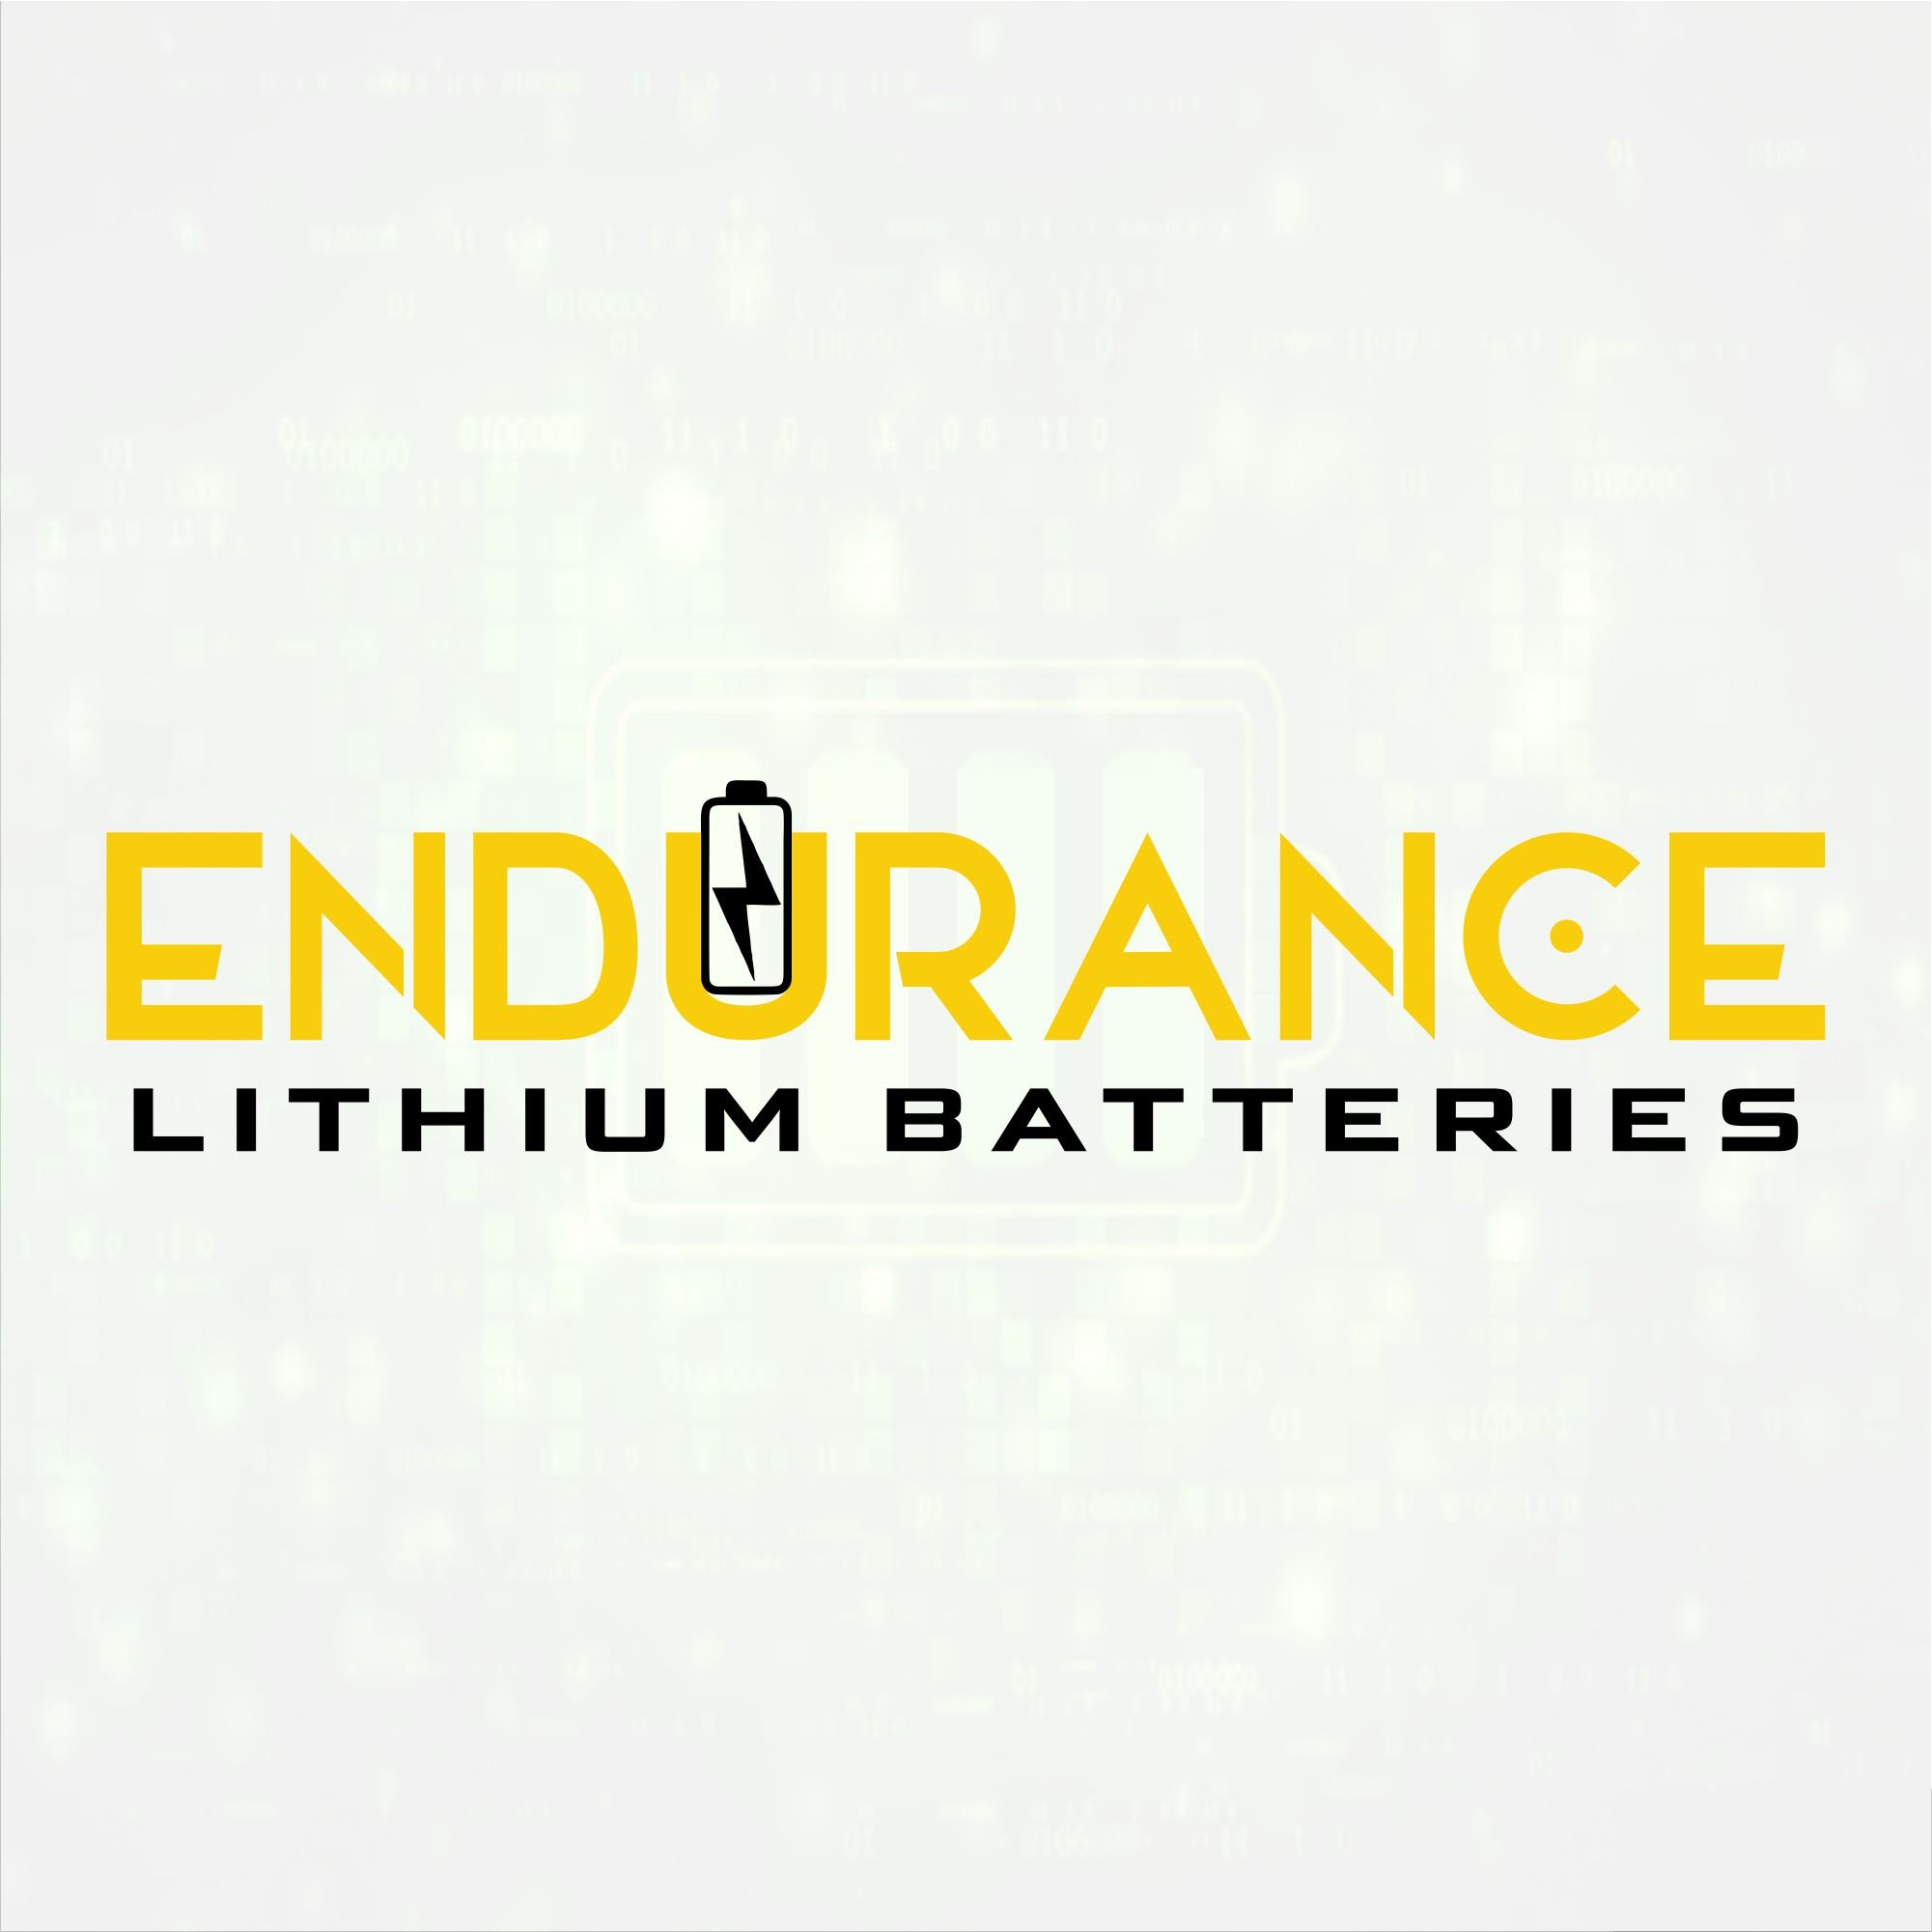 Endurance Lithium is a supplier of best in class LiFePO4 LFP Batteries to the Marine & RV Markets.

Energize Your Passion!